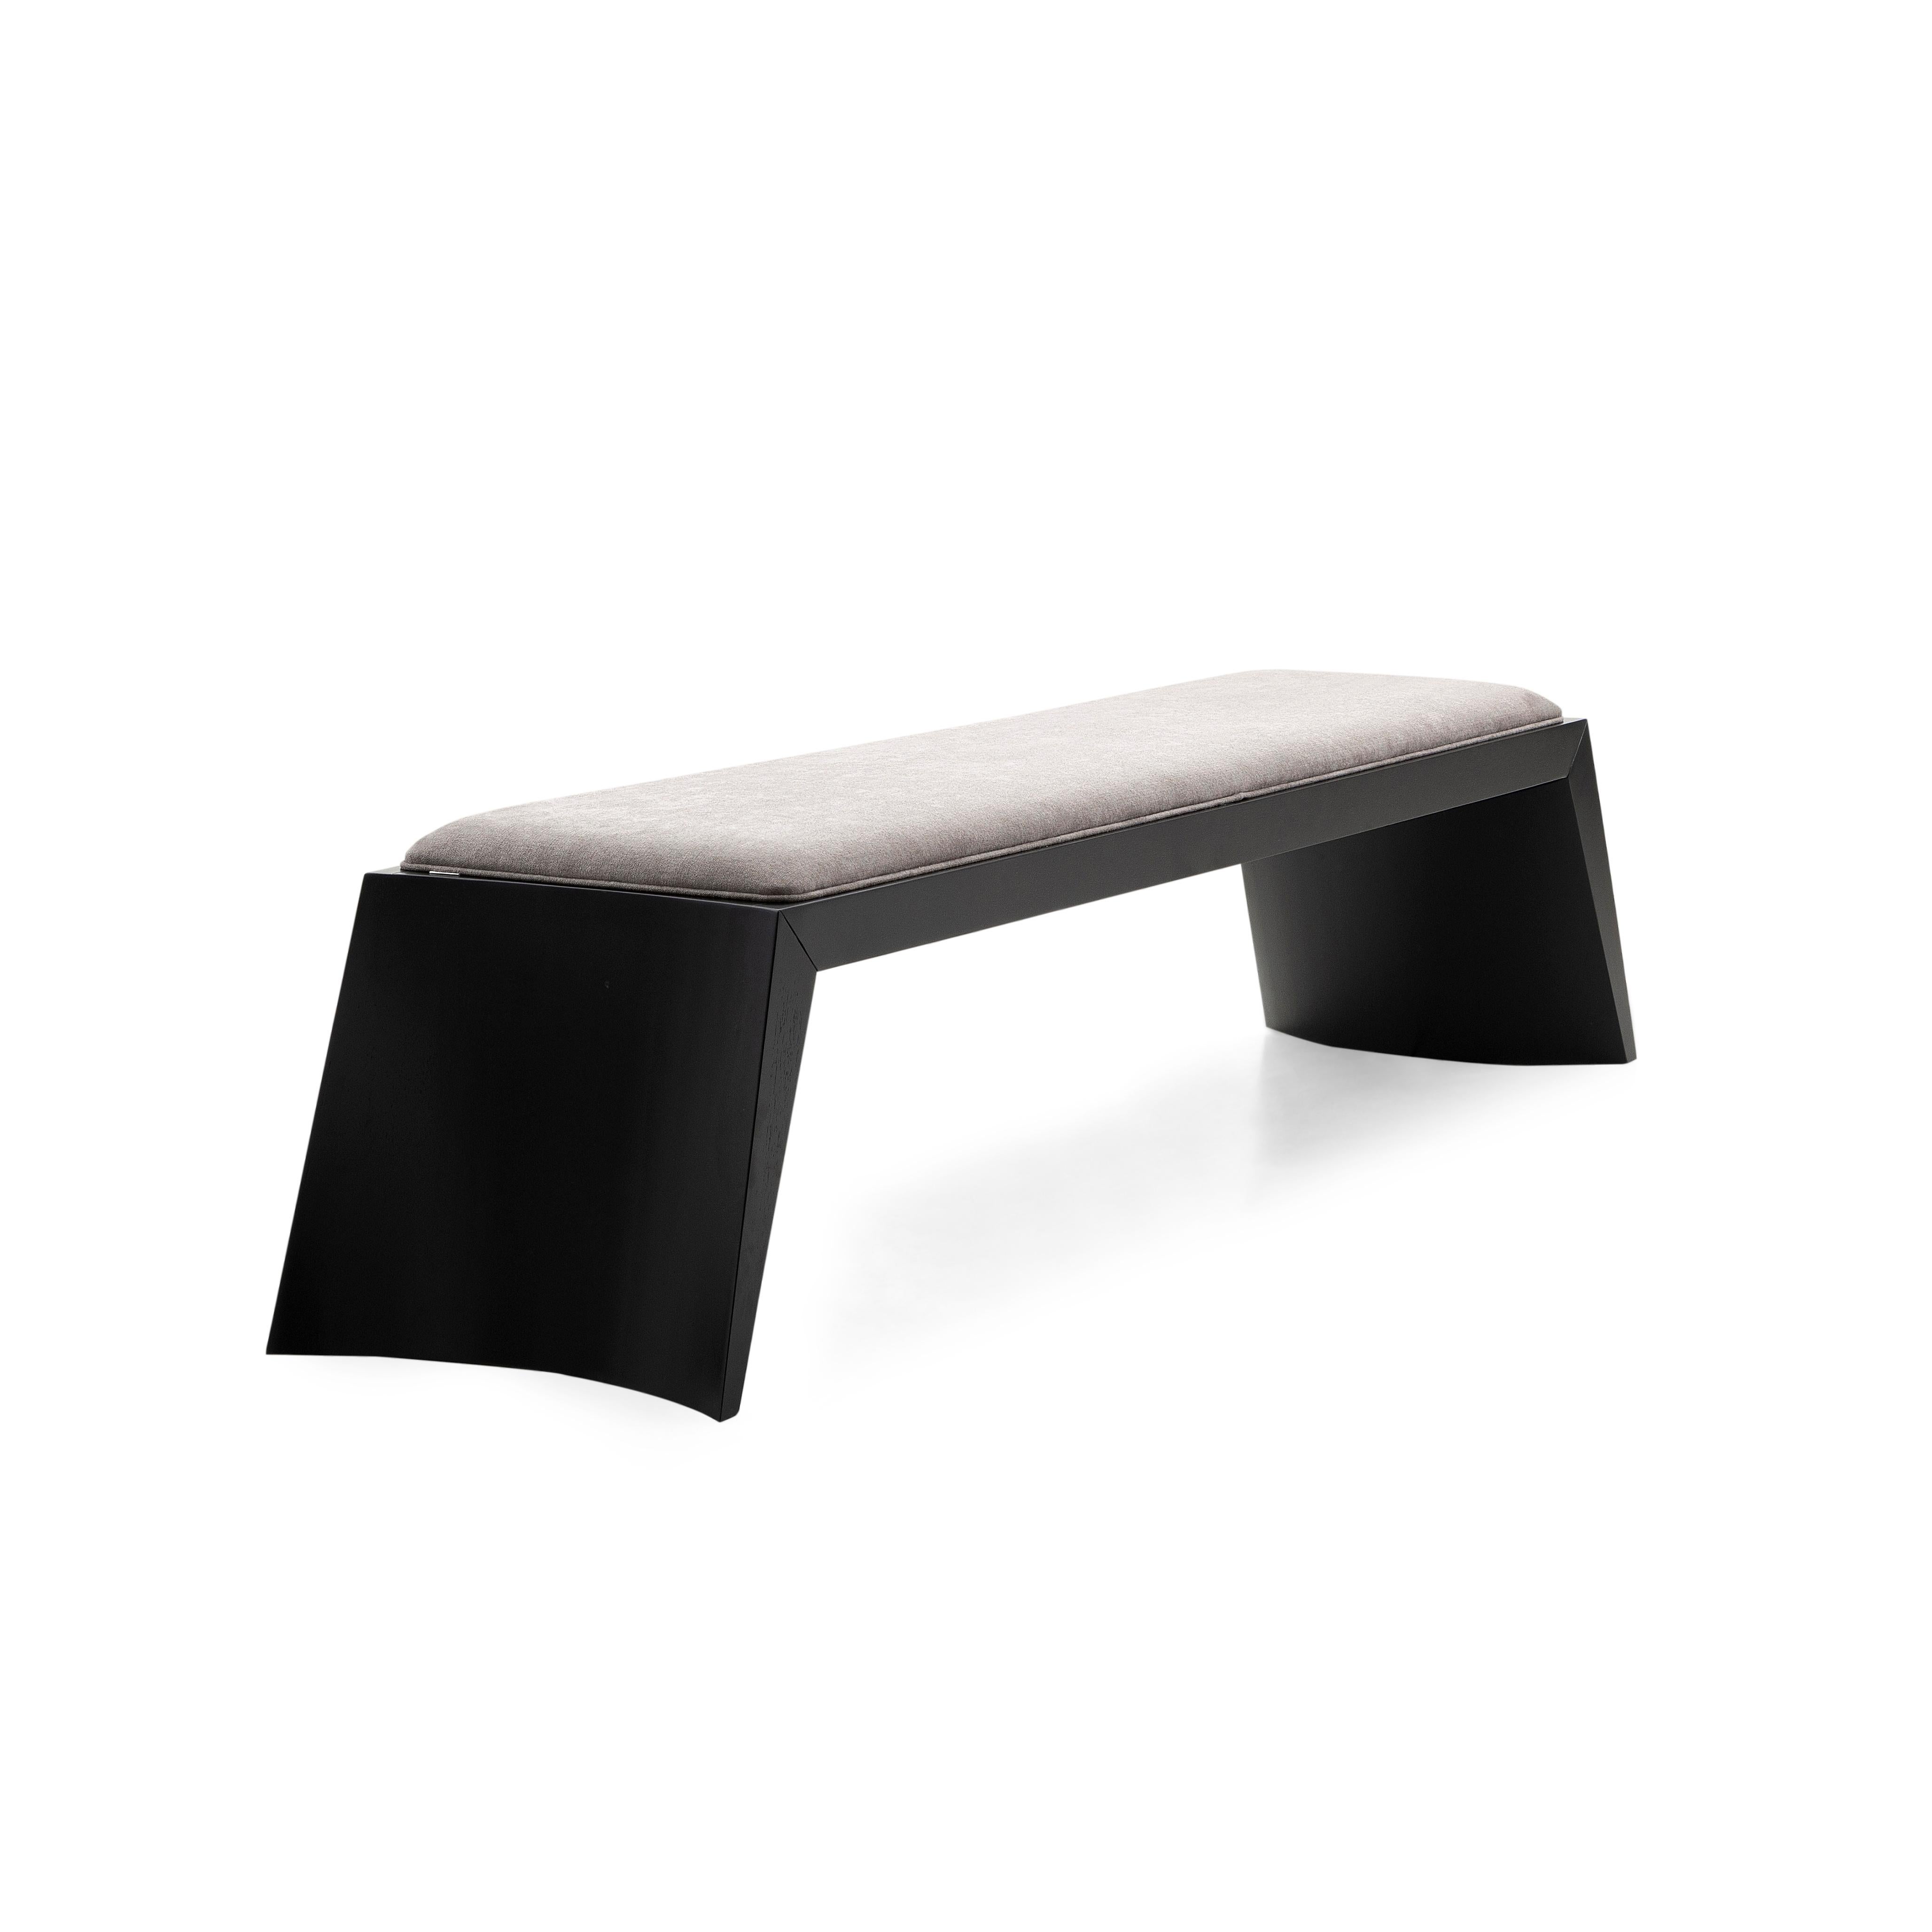 The trapezoid geometric shape is a plane figure formed by four sides. This shape inspires base and solidity, which are the outstanding characteristics of the TRAPÉZIO bench. Made of wood with high-density foam on the top, the piece is key to